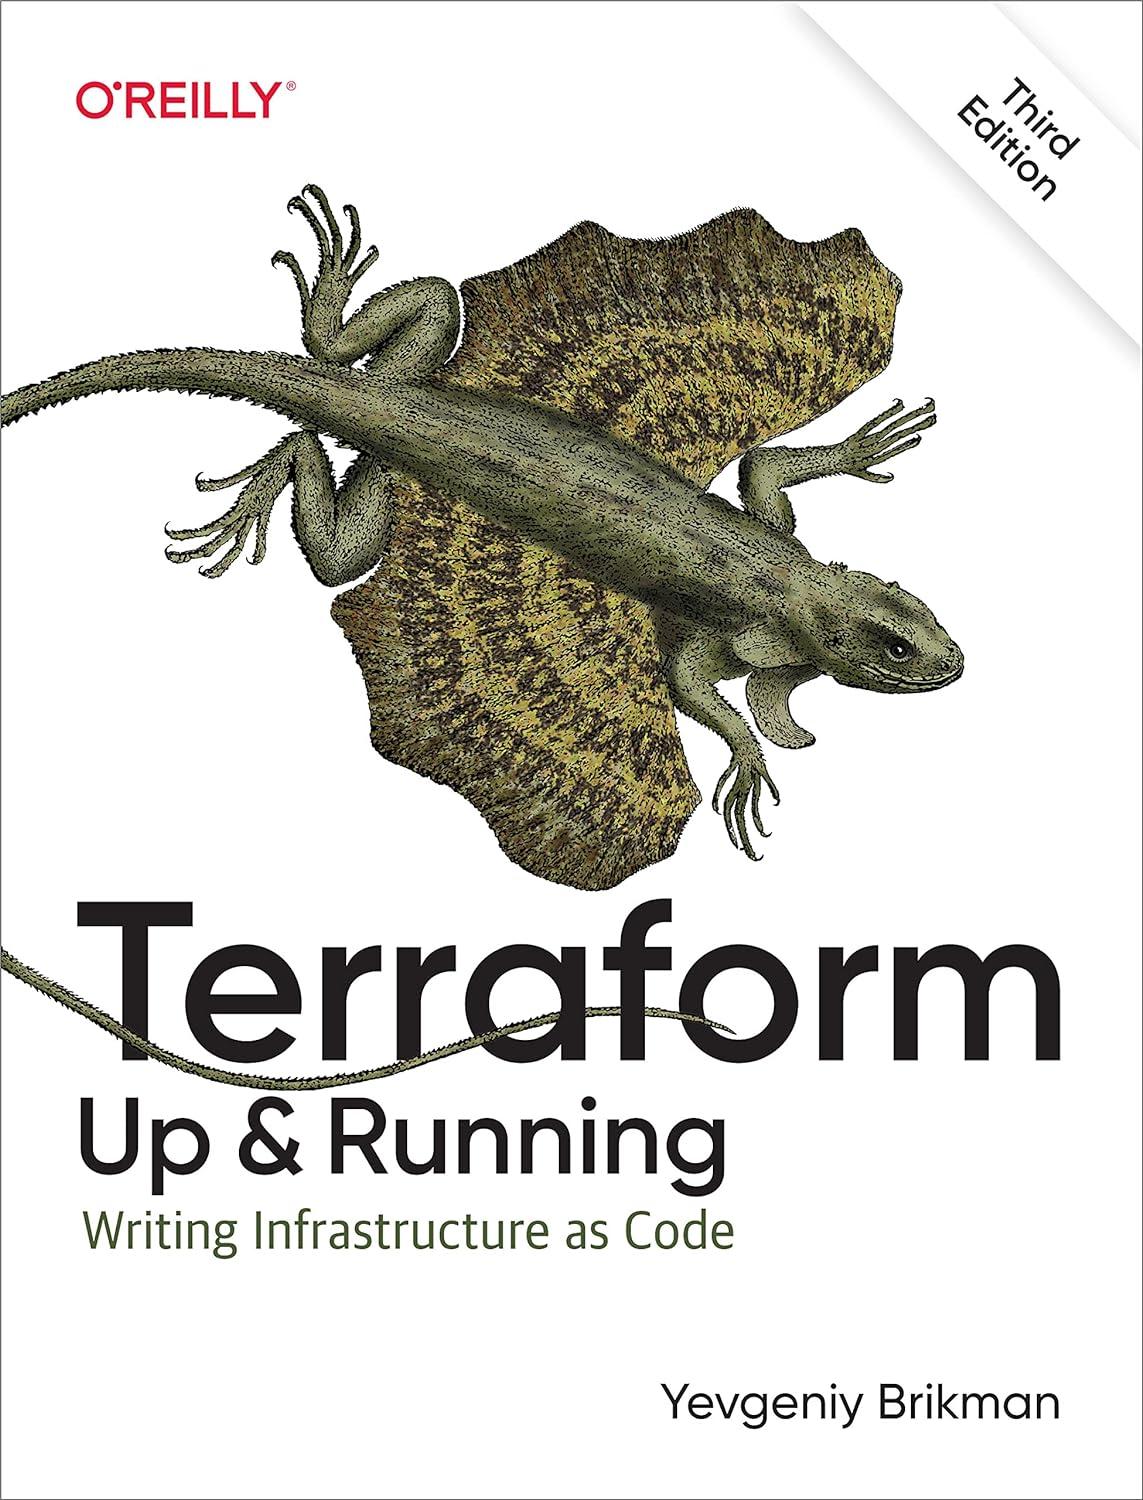 terraform up and running: writing infrastructure as code 3rd edition yevgeniy brikman 1098116747,